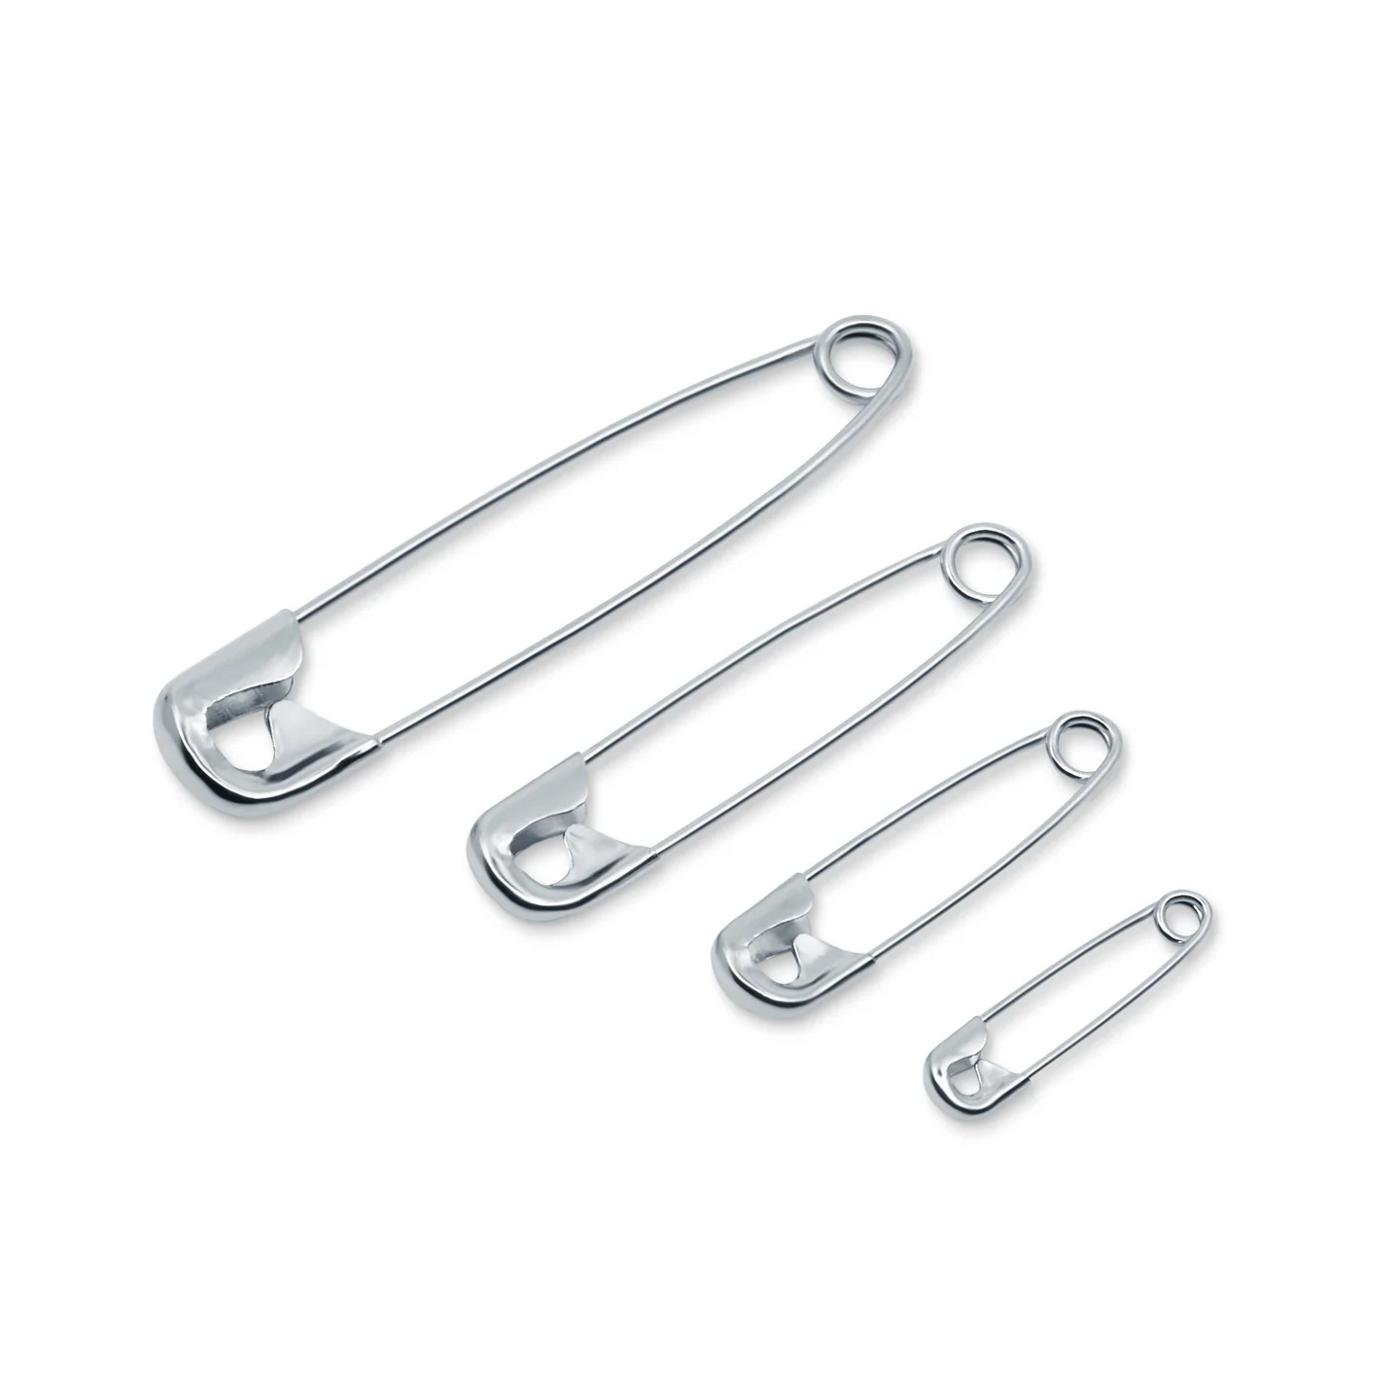 Dritz Assorted Safety Pins; image 4 of 4